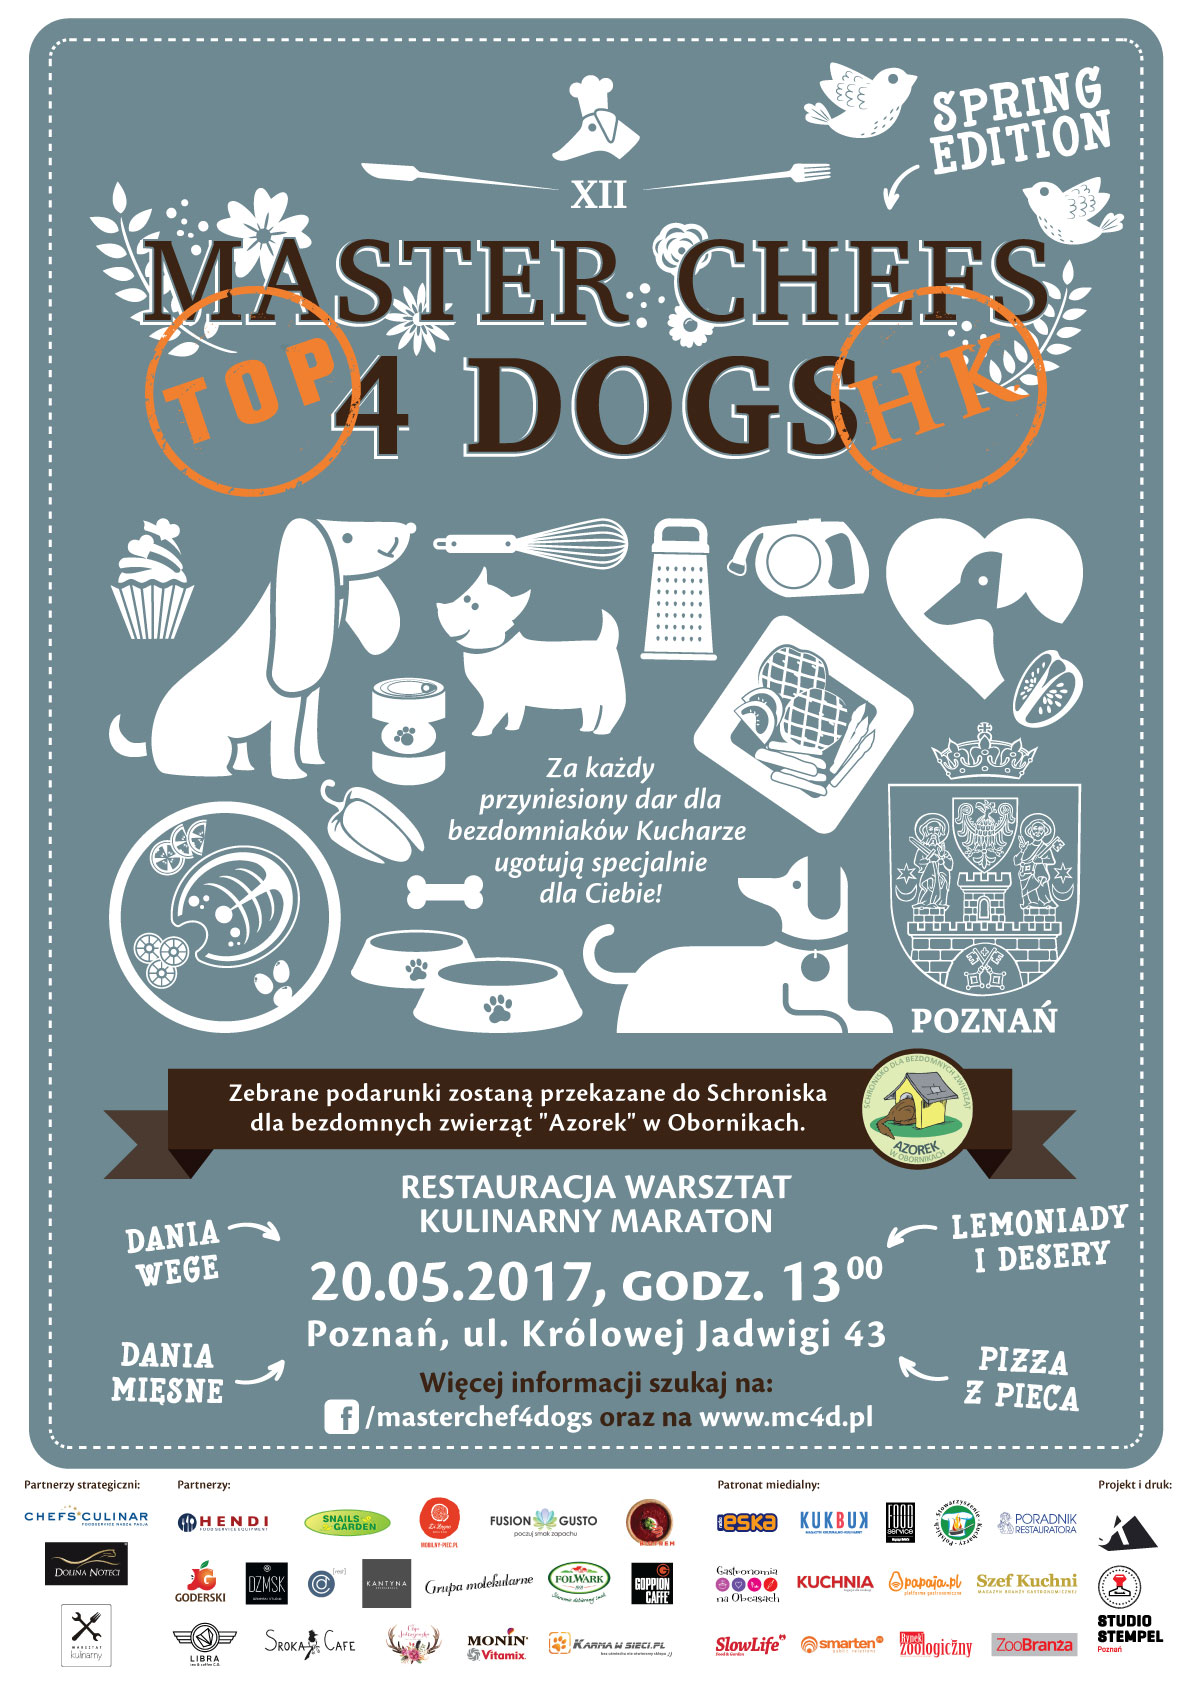 MASTER CHEFS 4 DOGS-SPRING EDITION